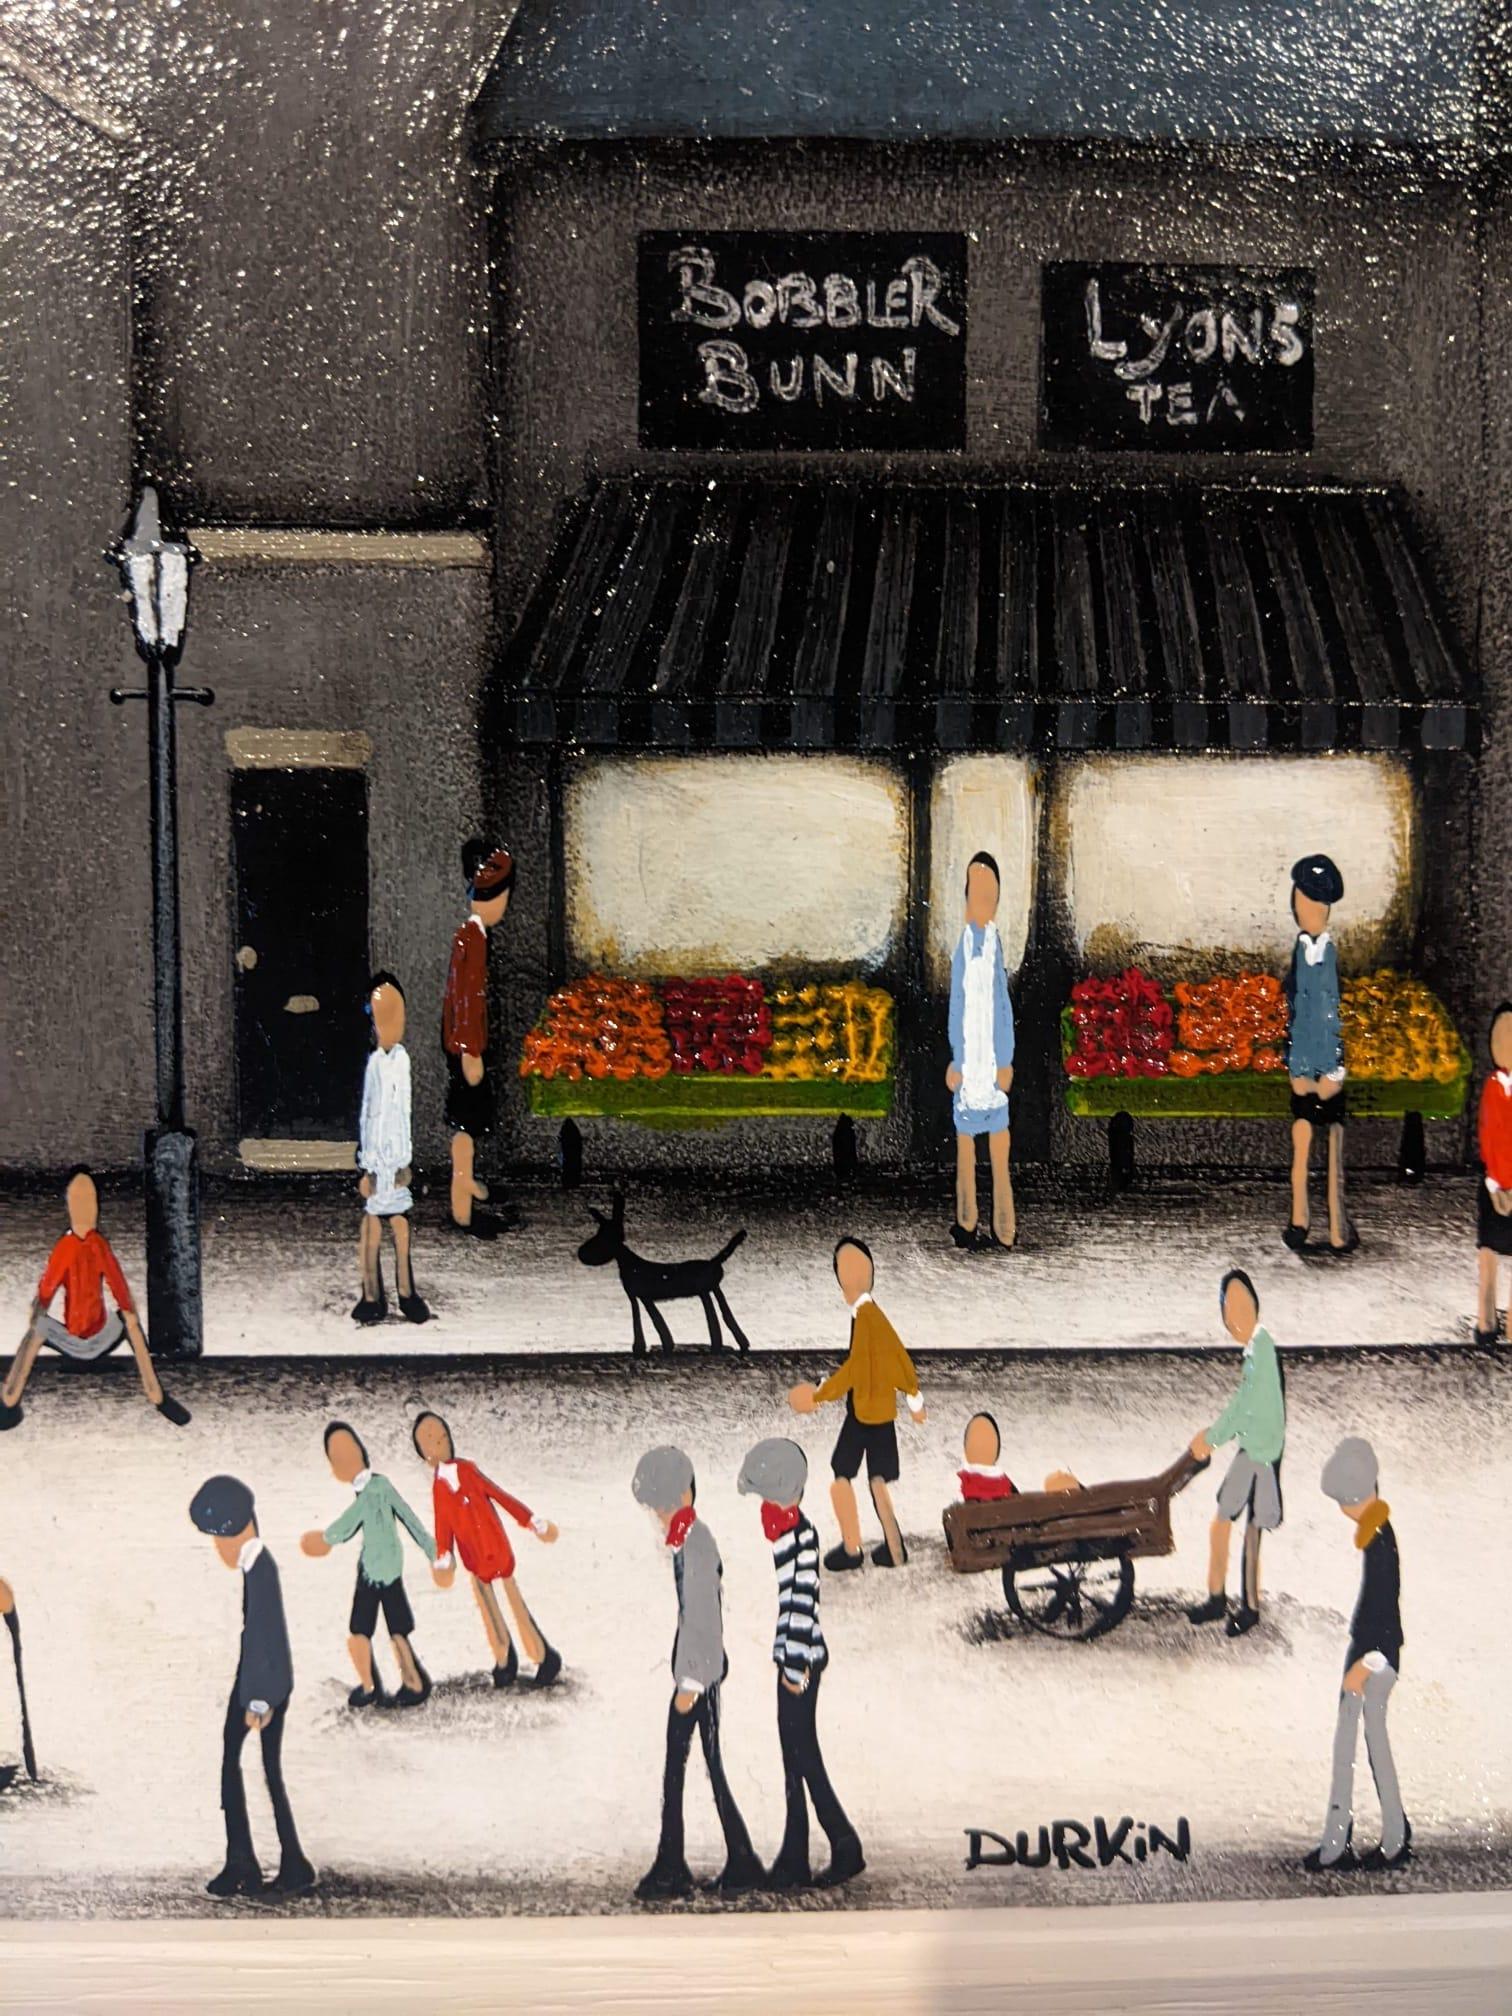 Bustling Street VI and Market Day are an original diptych of paintings by Sean Durkin. The scenes depict the high streets of an industrial town with people going about their usual lives. As with all of Sean's works this painting includes his trade